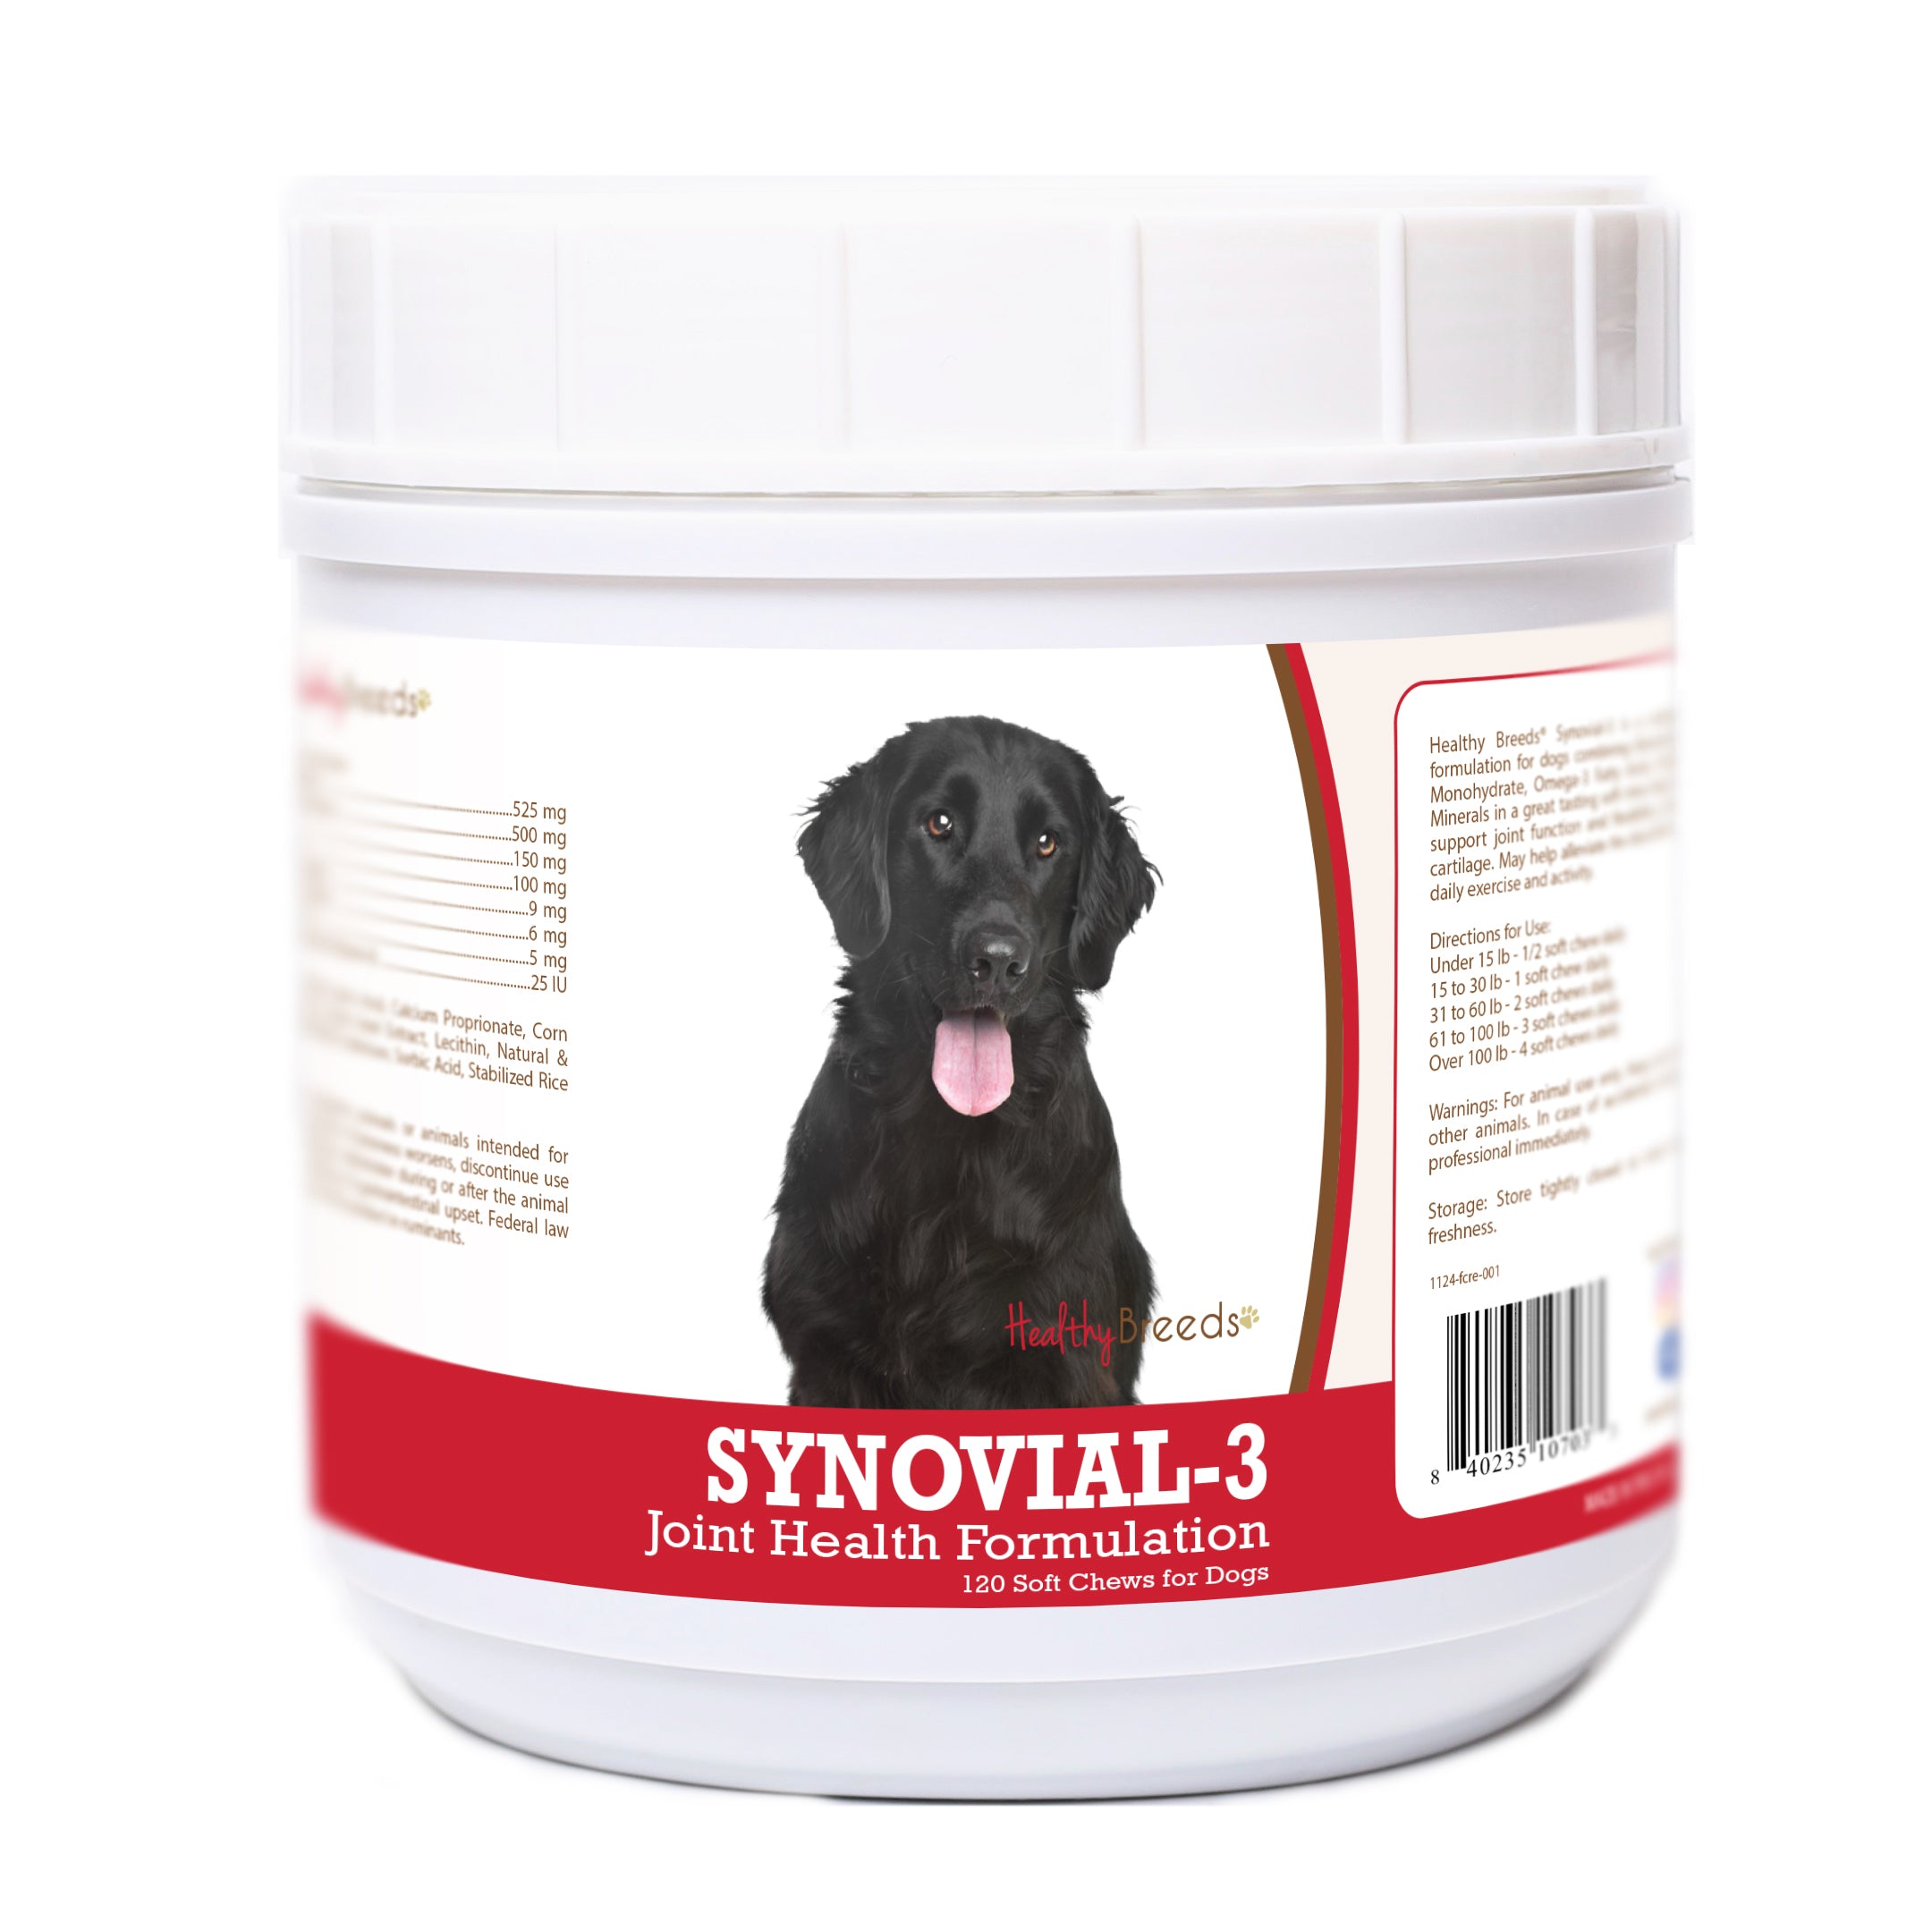 Flat Coated Retriever Synovial-3 Joint Health Formulation Soft Chews 120 Count